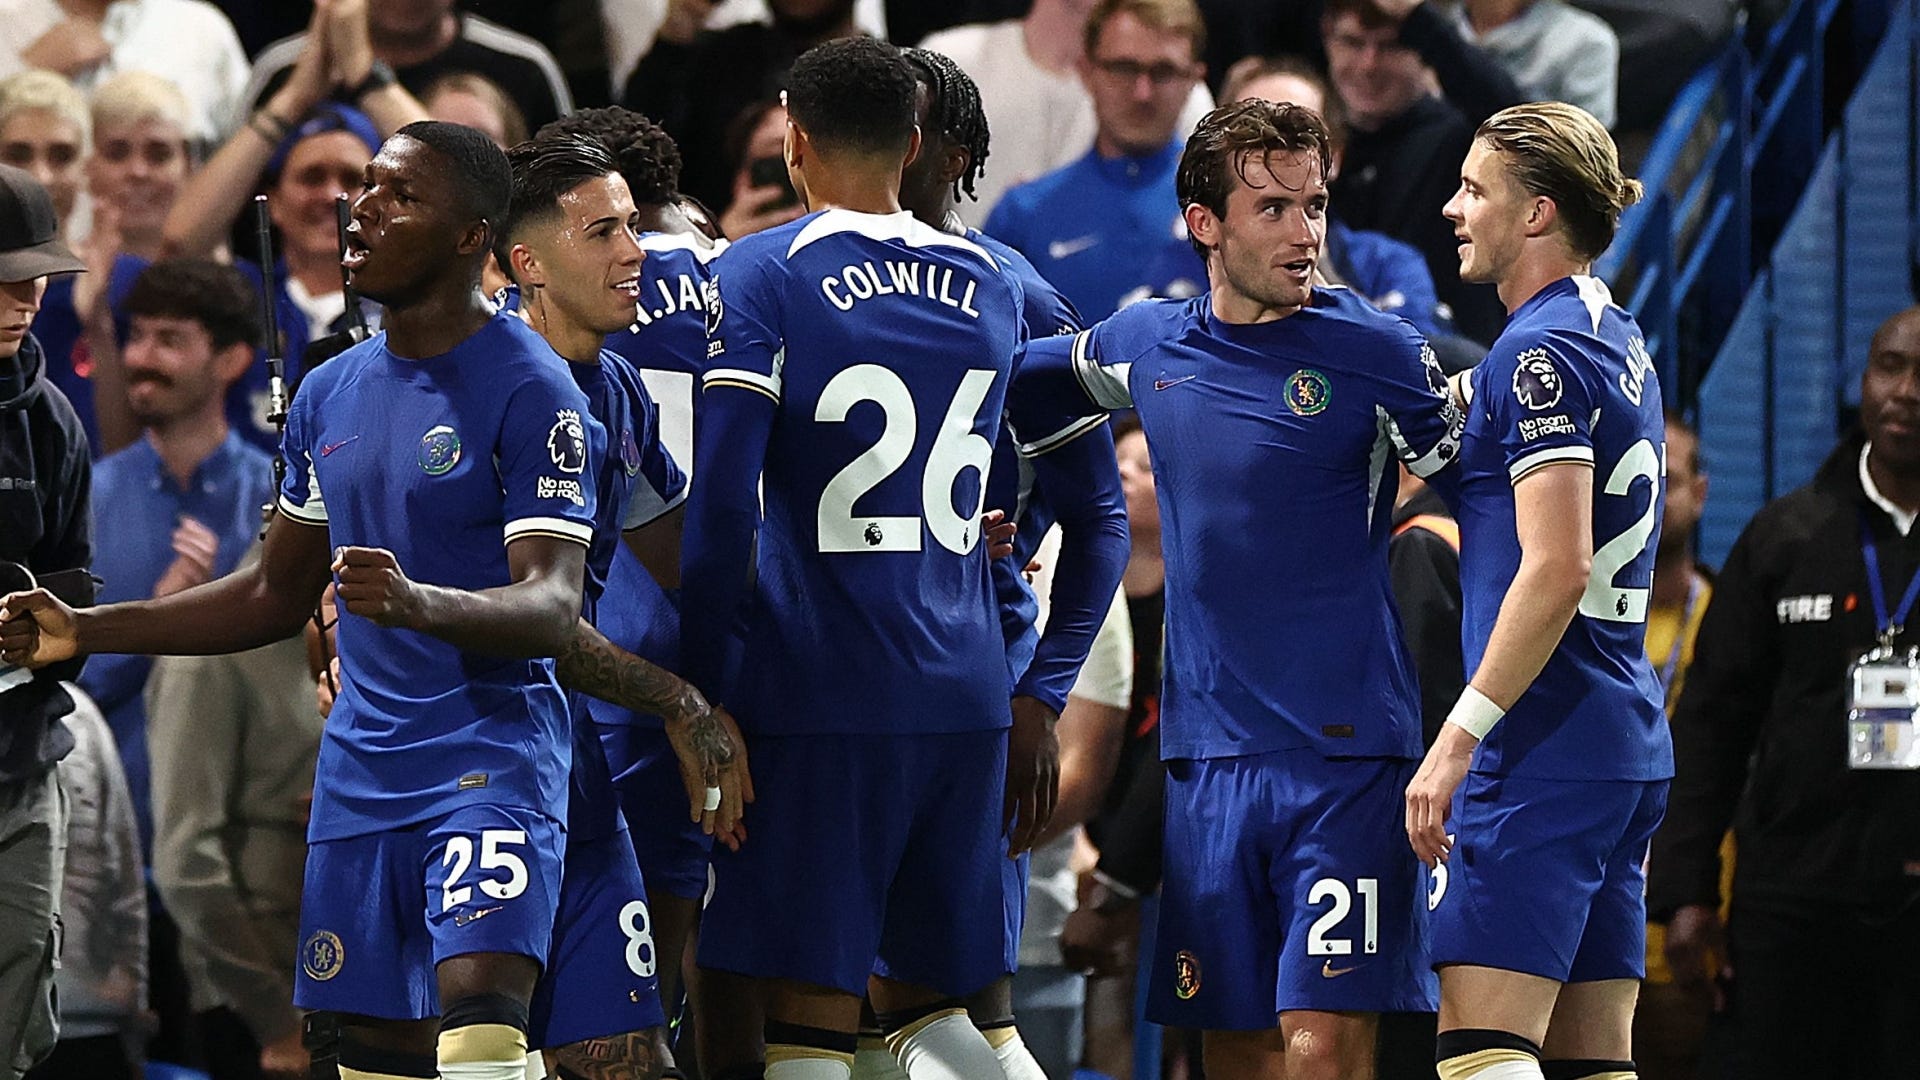 Chelsea vs Wimbledon Live stream, TV channel, kick-off time and where to watch Goal US